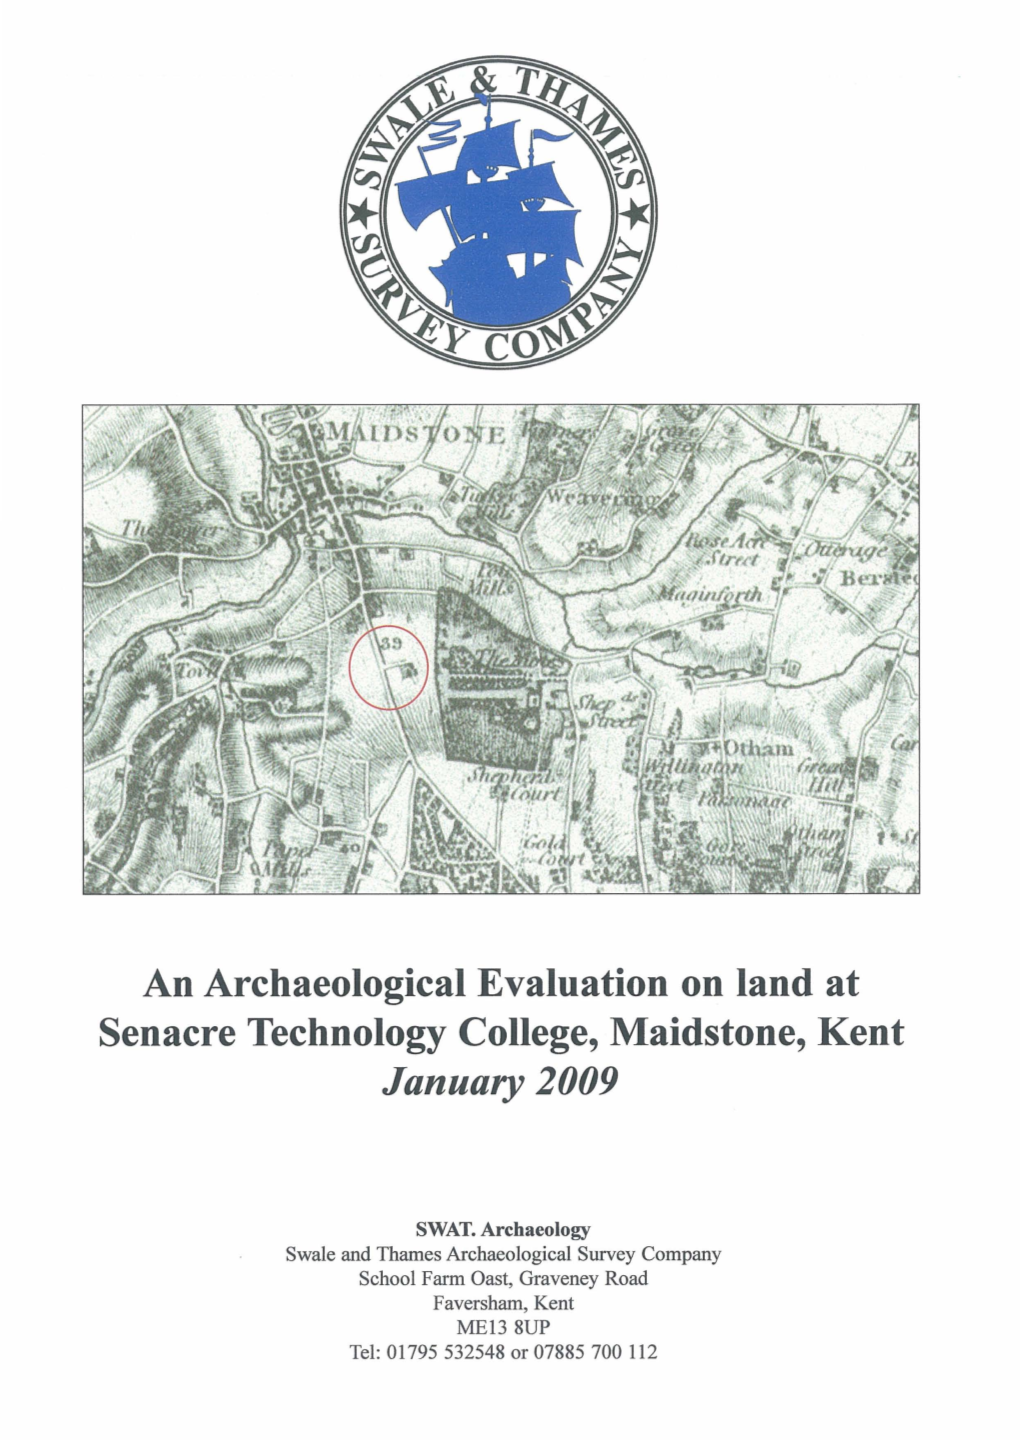 An Archaeological Evaluation on Land at Senacre Technology College, Maidstone, Kent January 2009